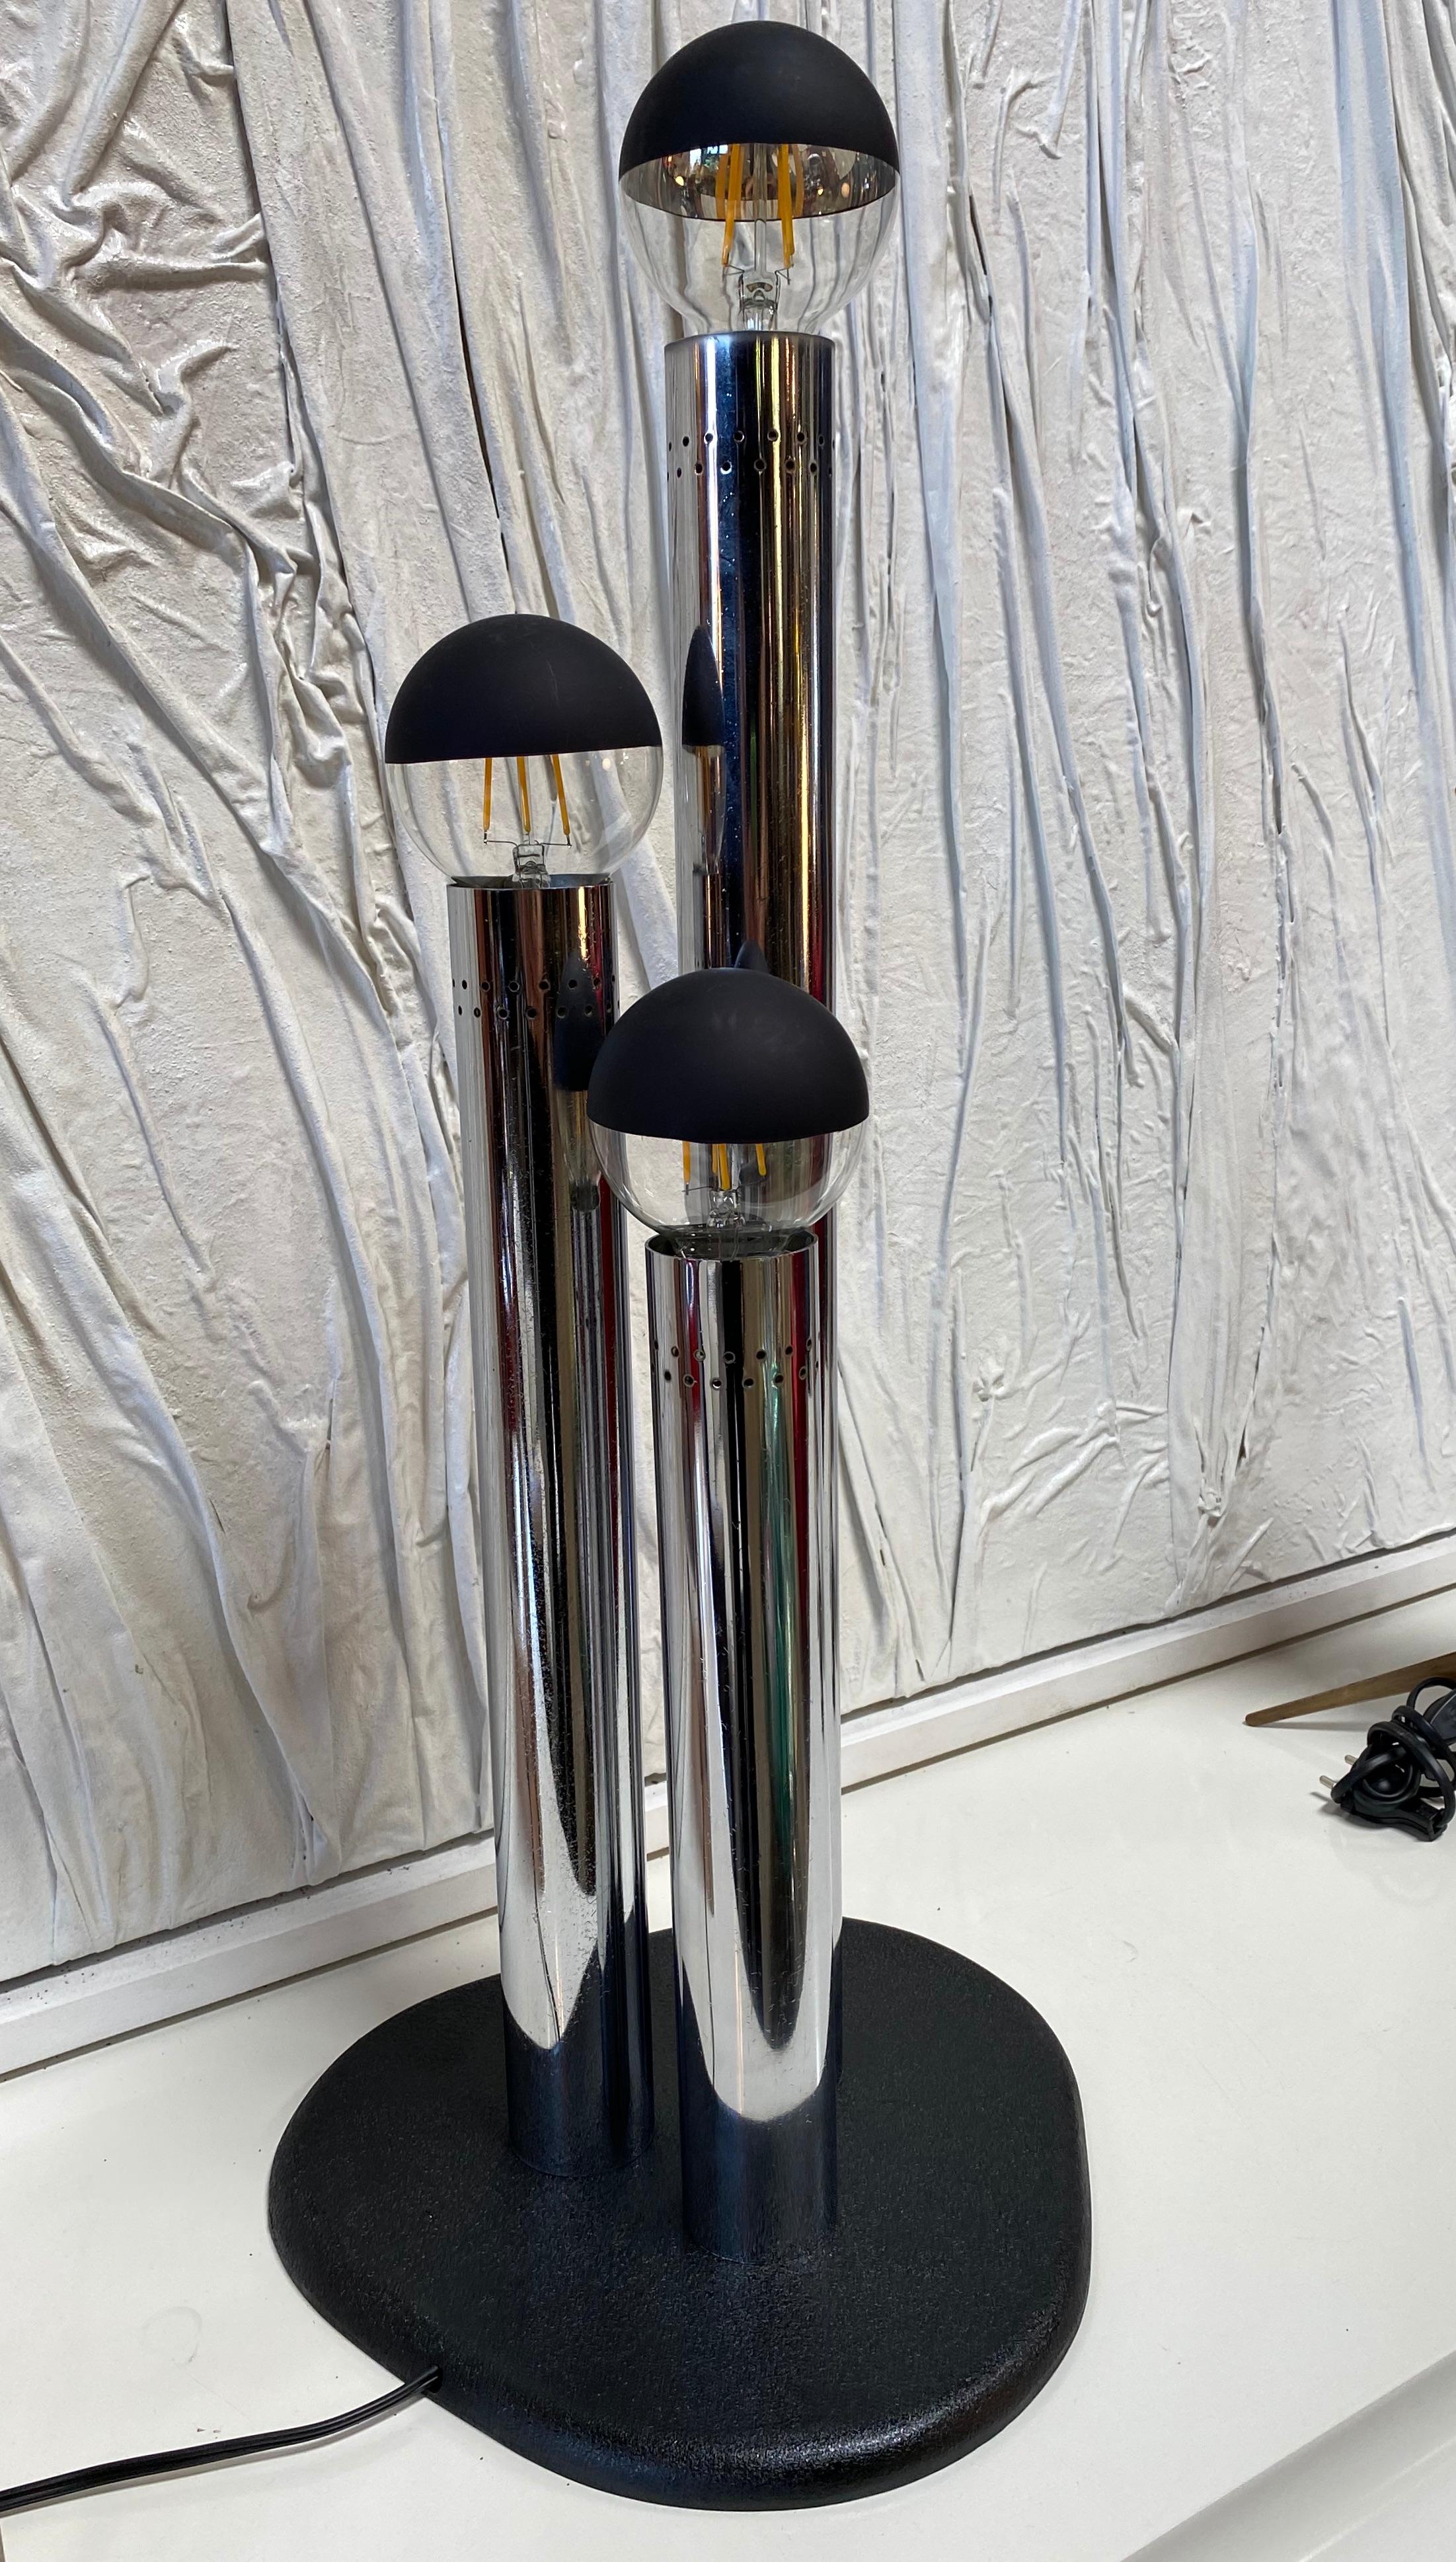 Space Age lamp is a beautiful decorative lamp realized in the 1970s by Goffredo Reggiani for Reggiani Illuminazione.

A very beautiful table lamp with three lights realized in chromed steel with an elegant and sinuous design.

Reggiani